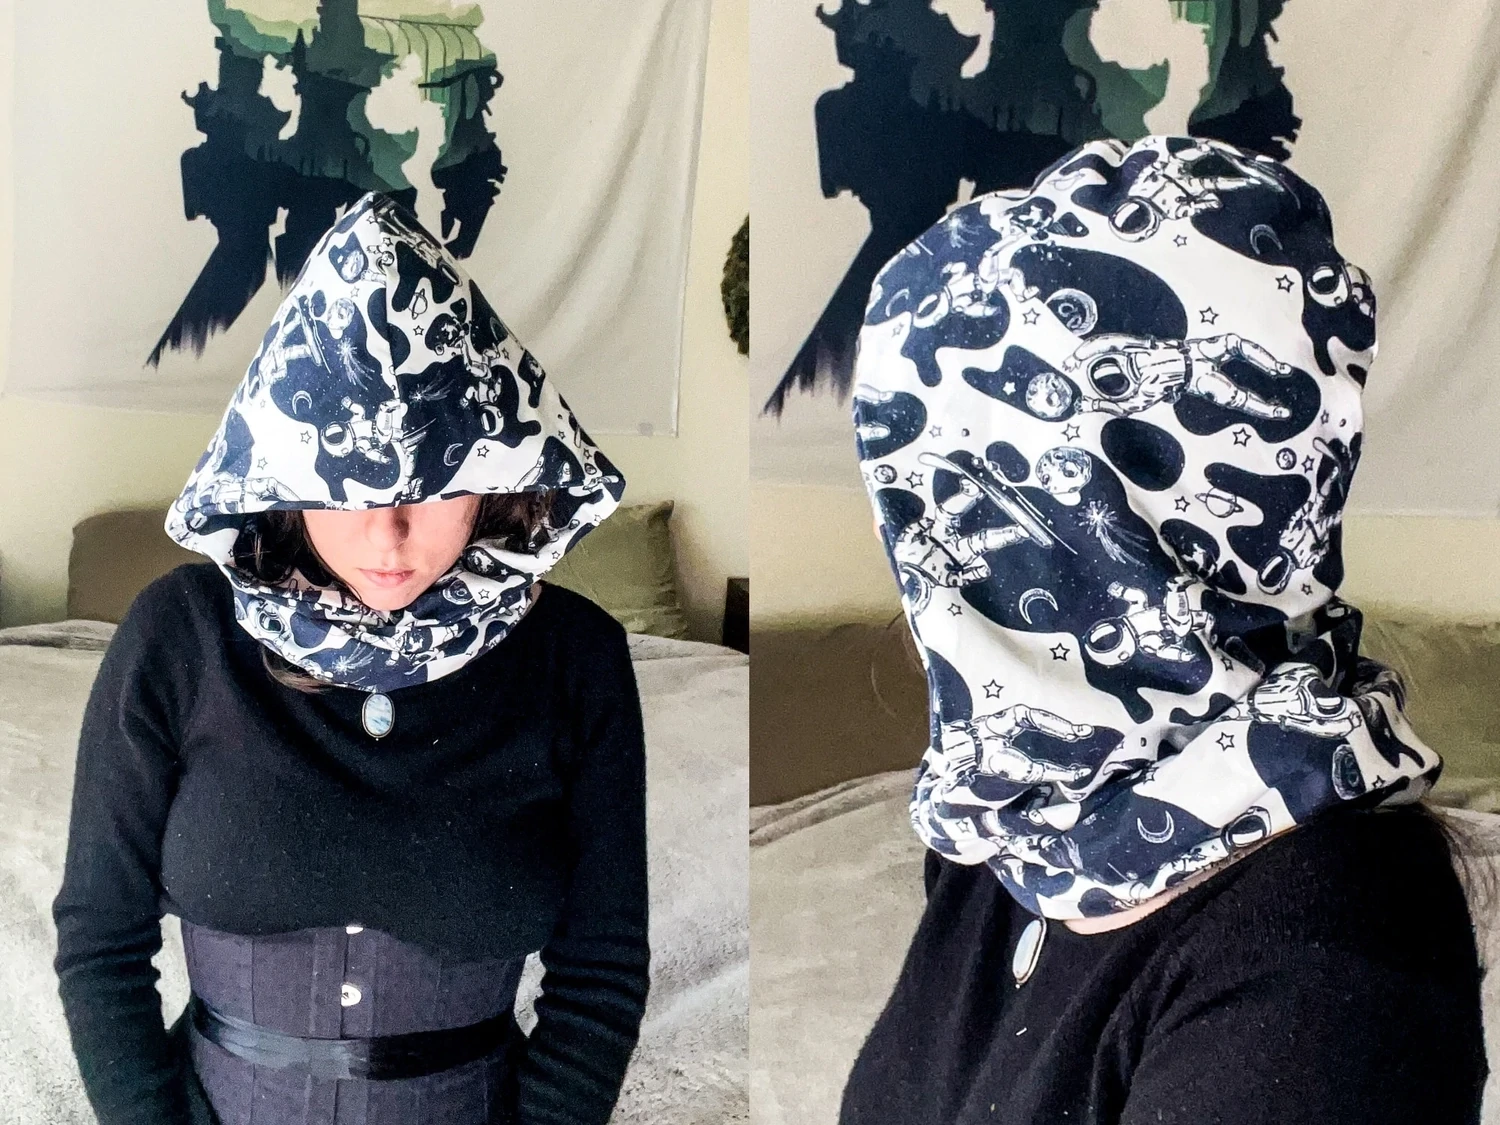 SALE - Flannel Cowl Infinity Scarf - Astronaut Skater (COWL026)